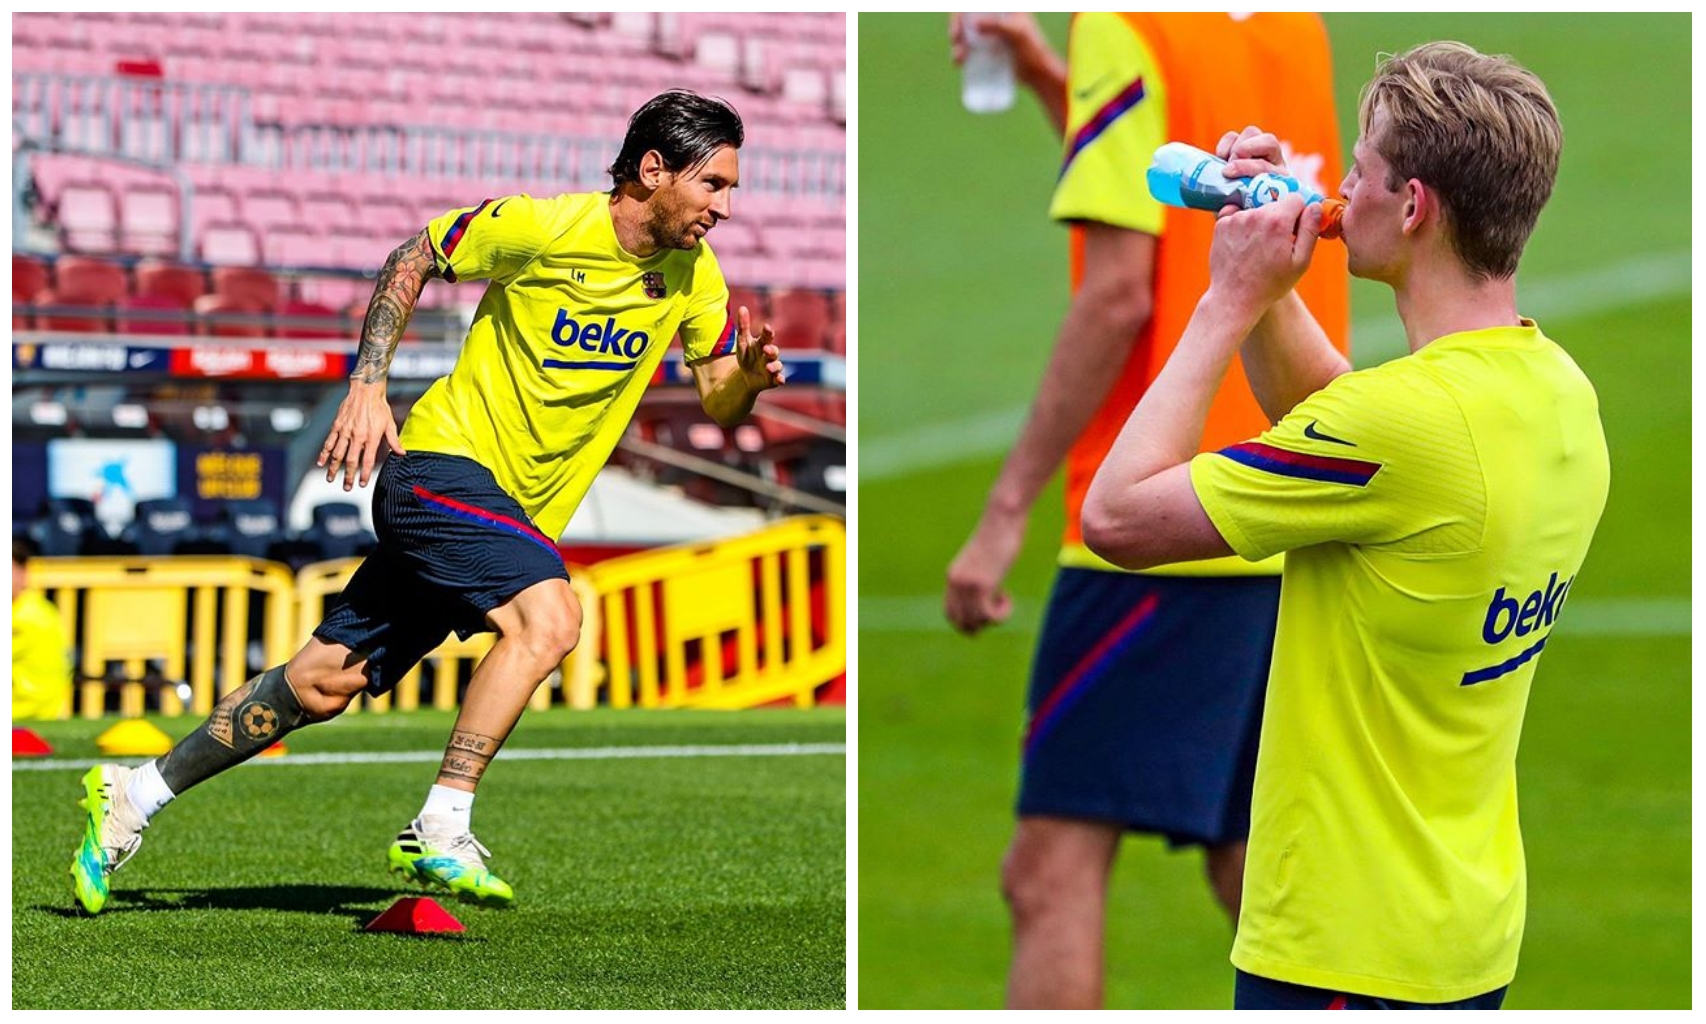 Barcelona holds first training session at Camp Nou as league resumption edge closer (Photos)